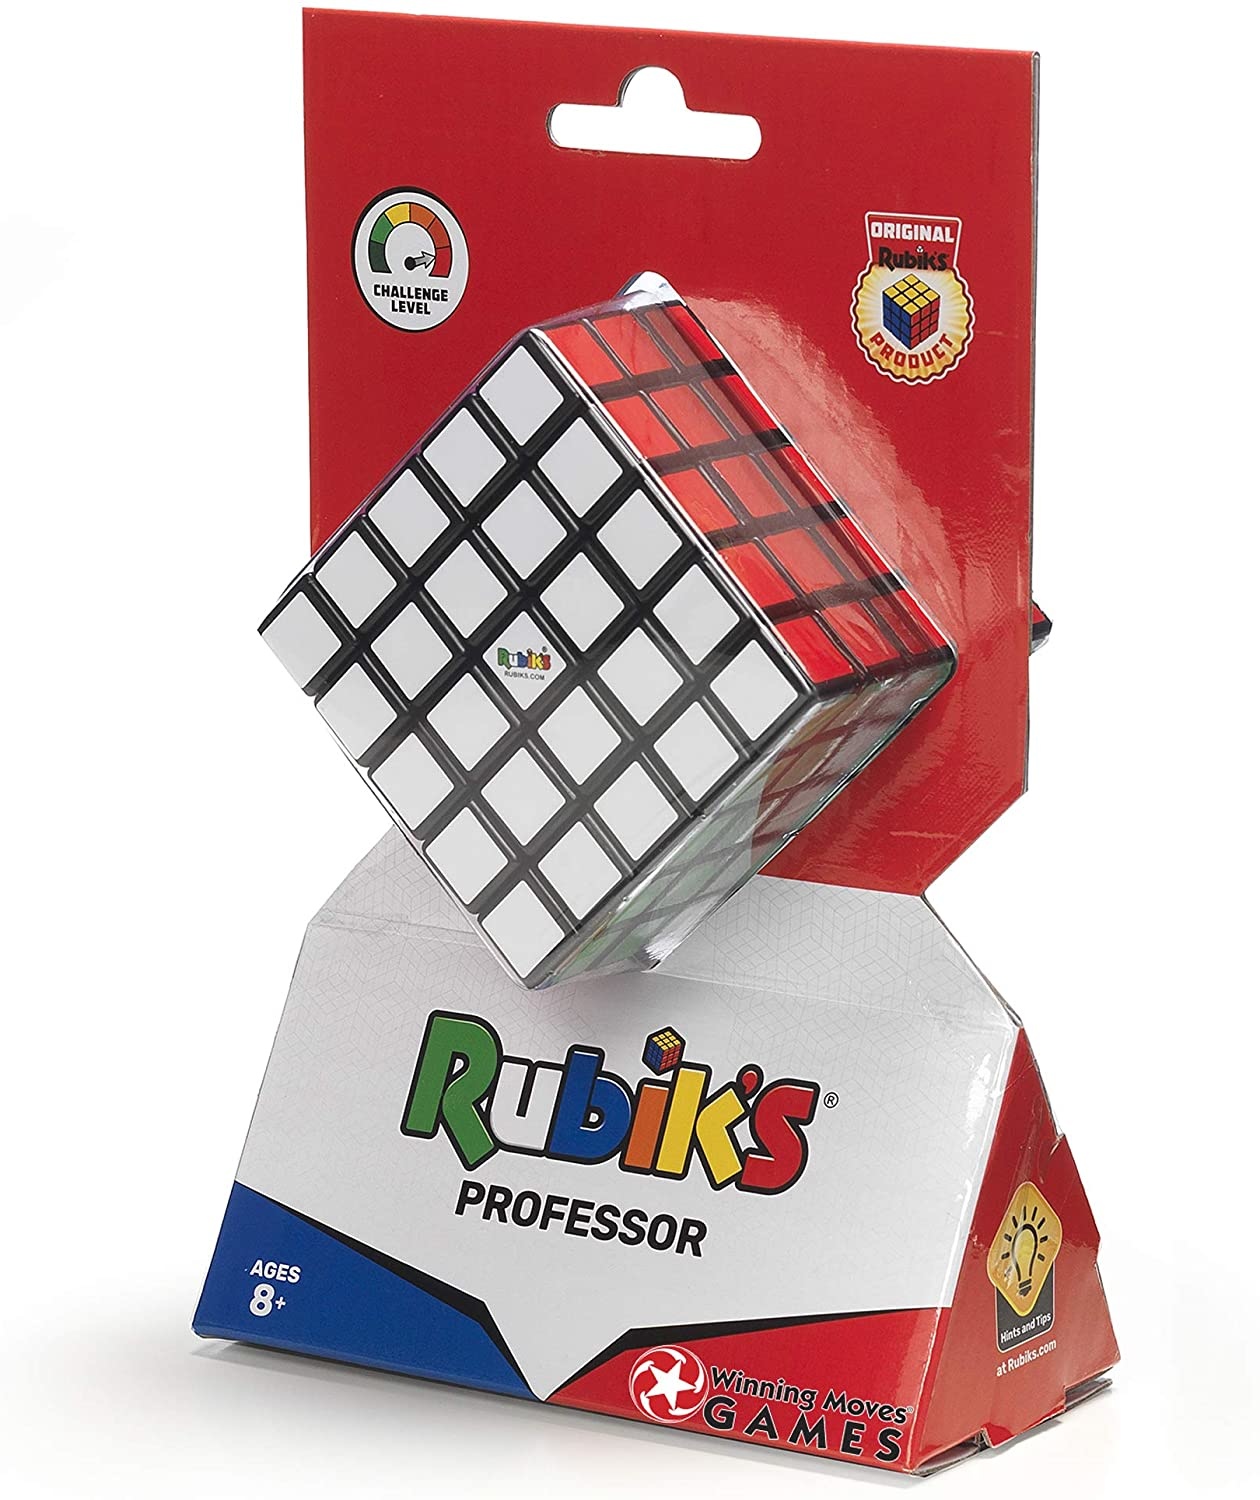 Rubiks 5X5 Cube - BOARD GAMES » SKILL TESTERS - The Games Cube